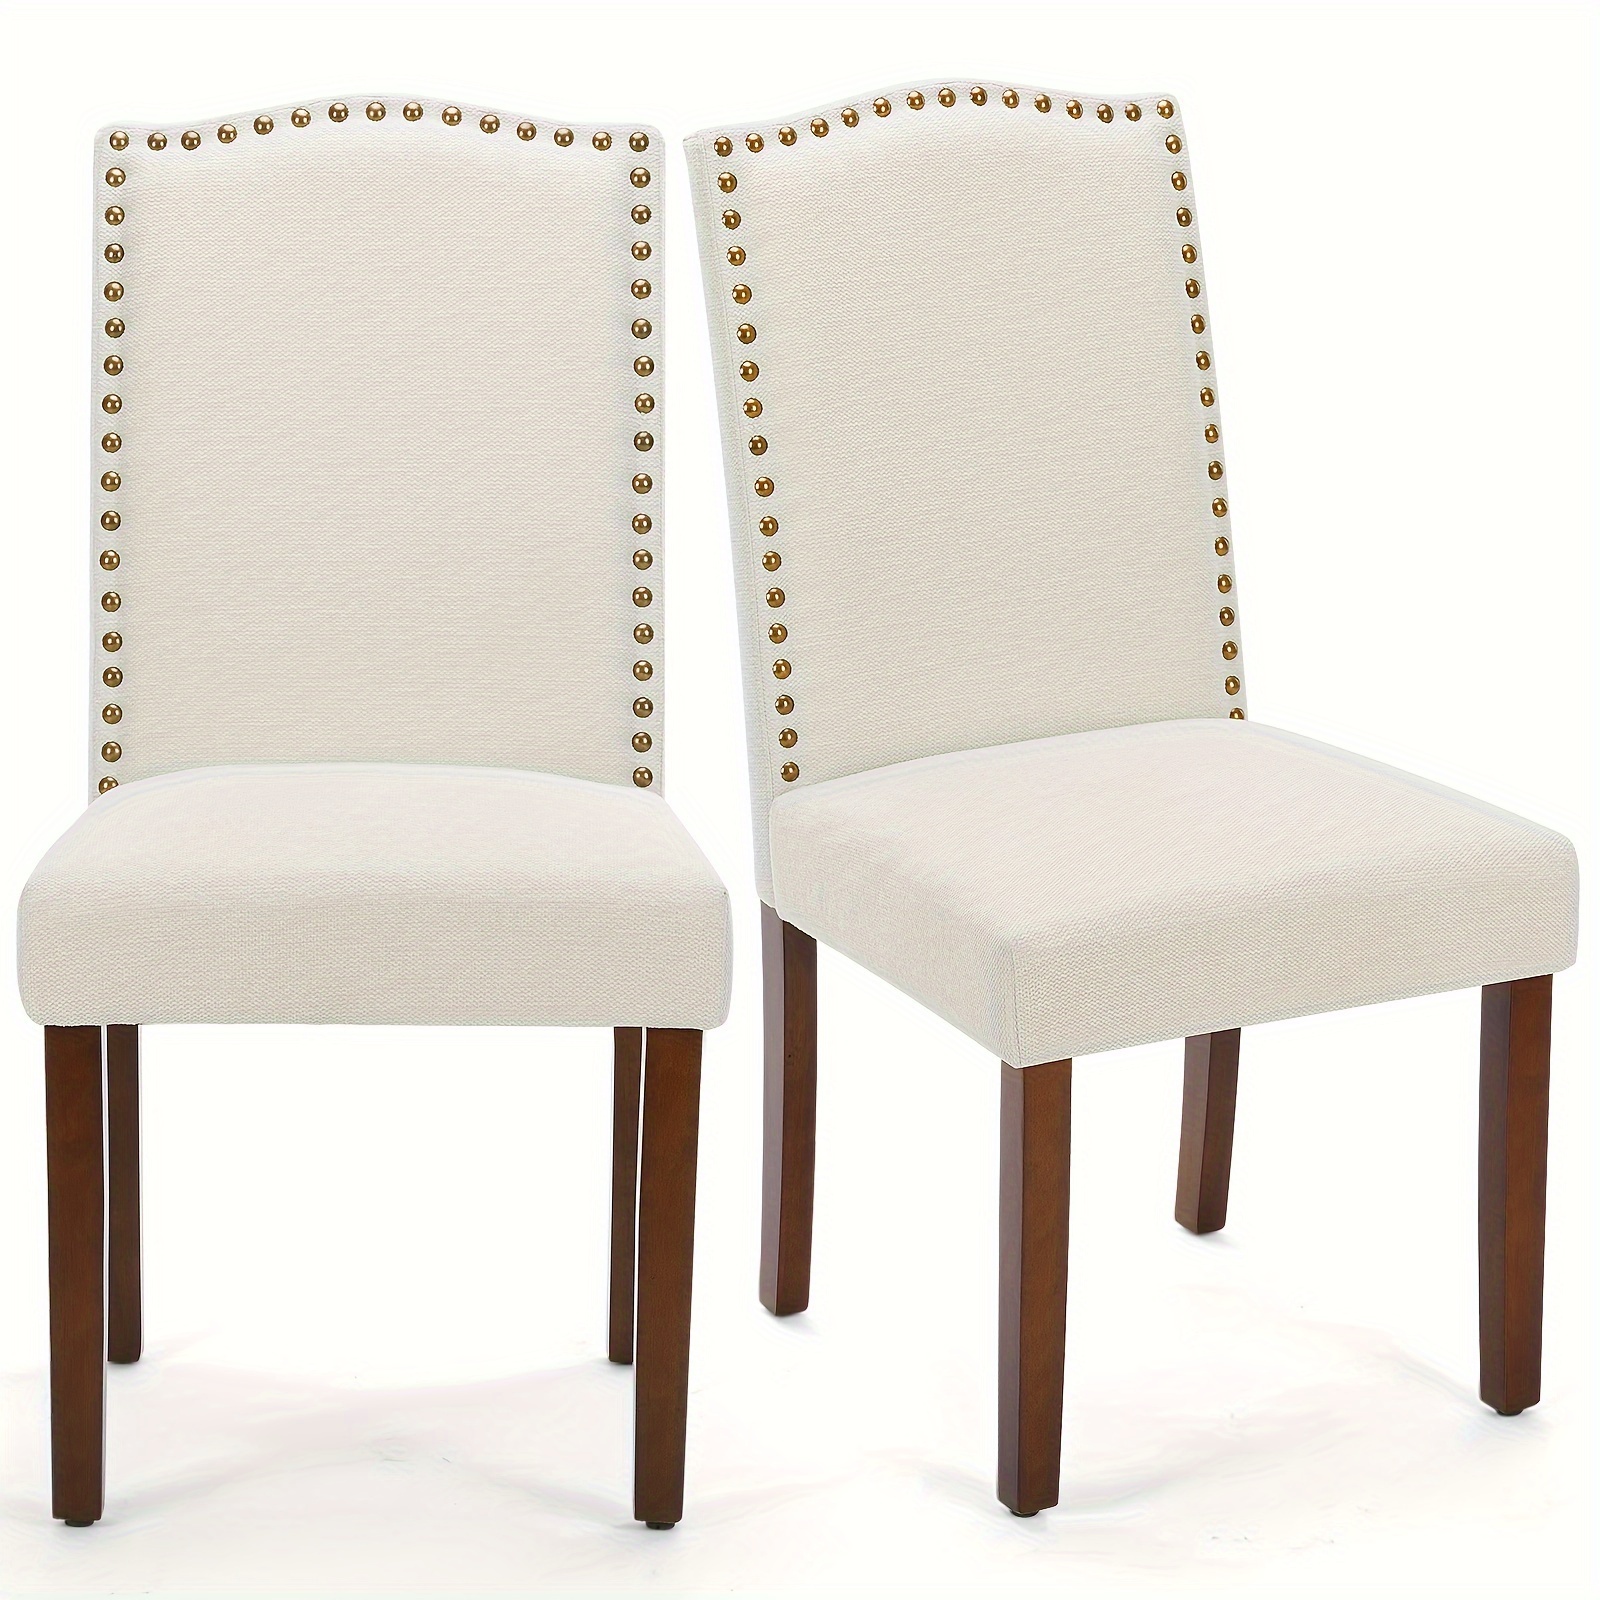 

2pcs Contemporary Upholstered Dining Chairs With Nailhead Trim And Fabric Finish, Ideal For Shops, Dining Tables, Kitchens, And Living Room Spaces